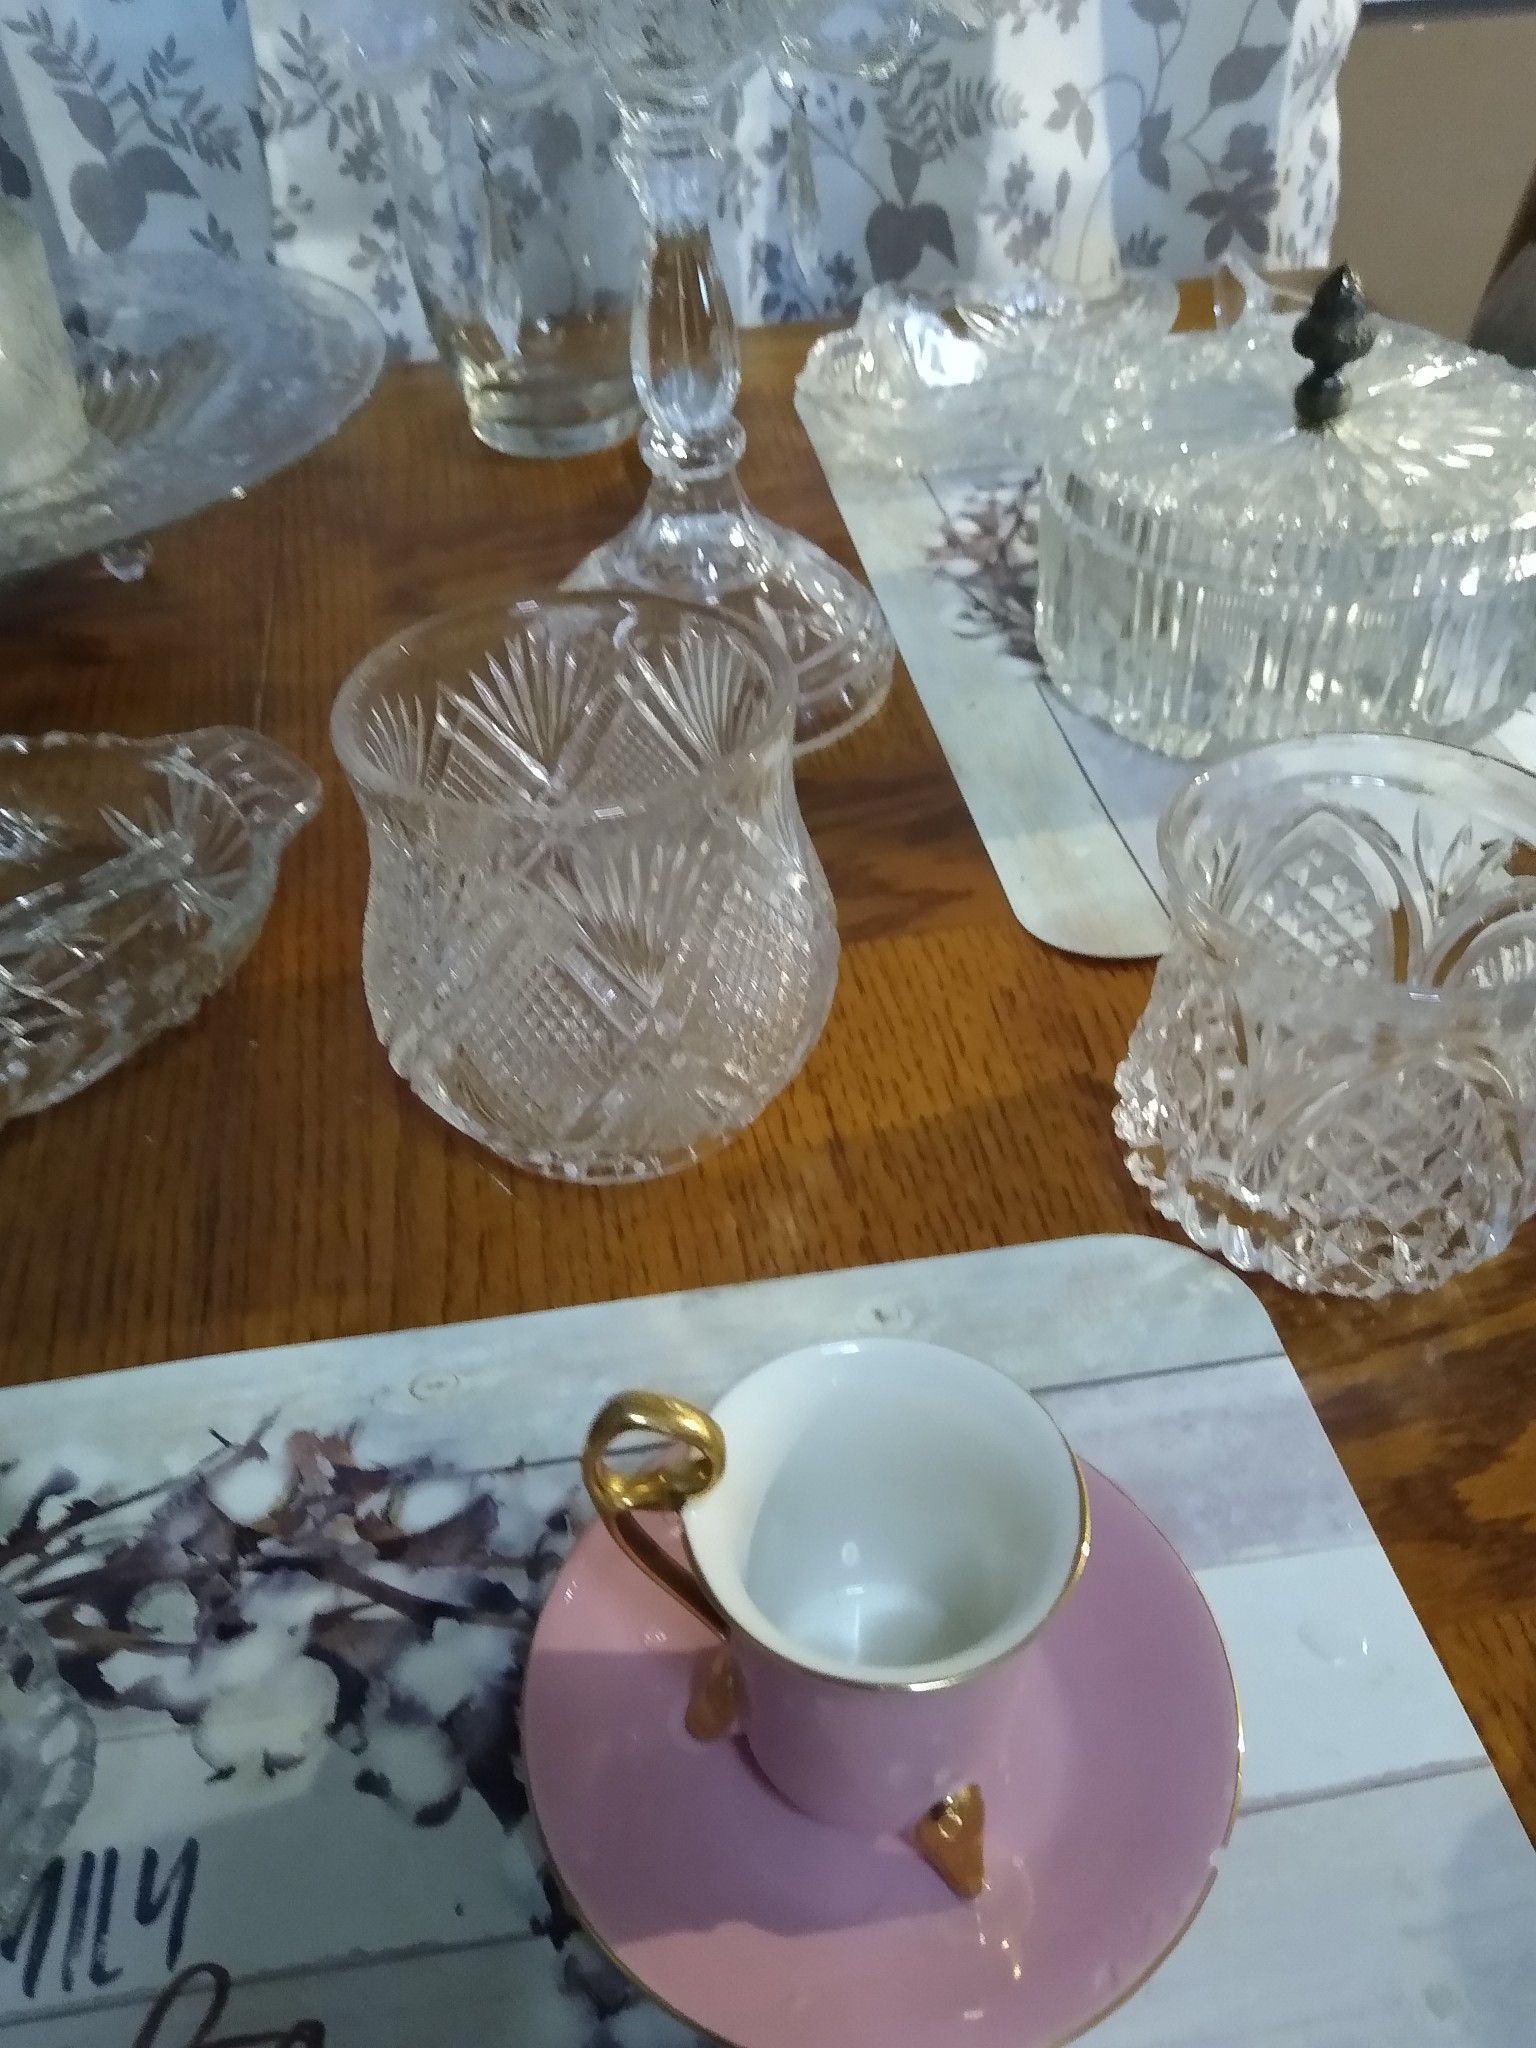 Nice nice glass Crystal candy dishes are bases Olive bowls for the holidays